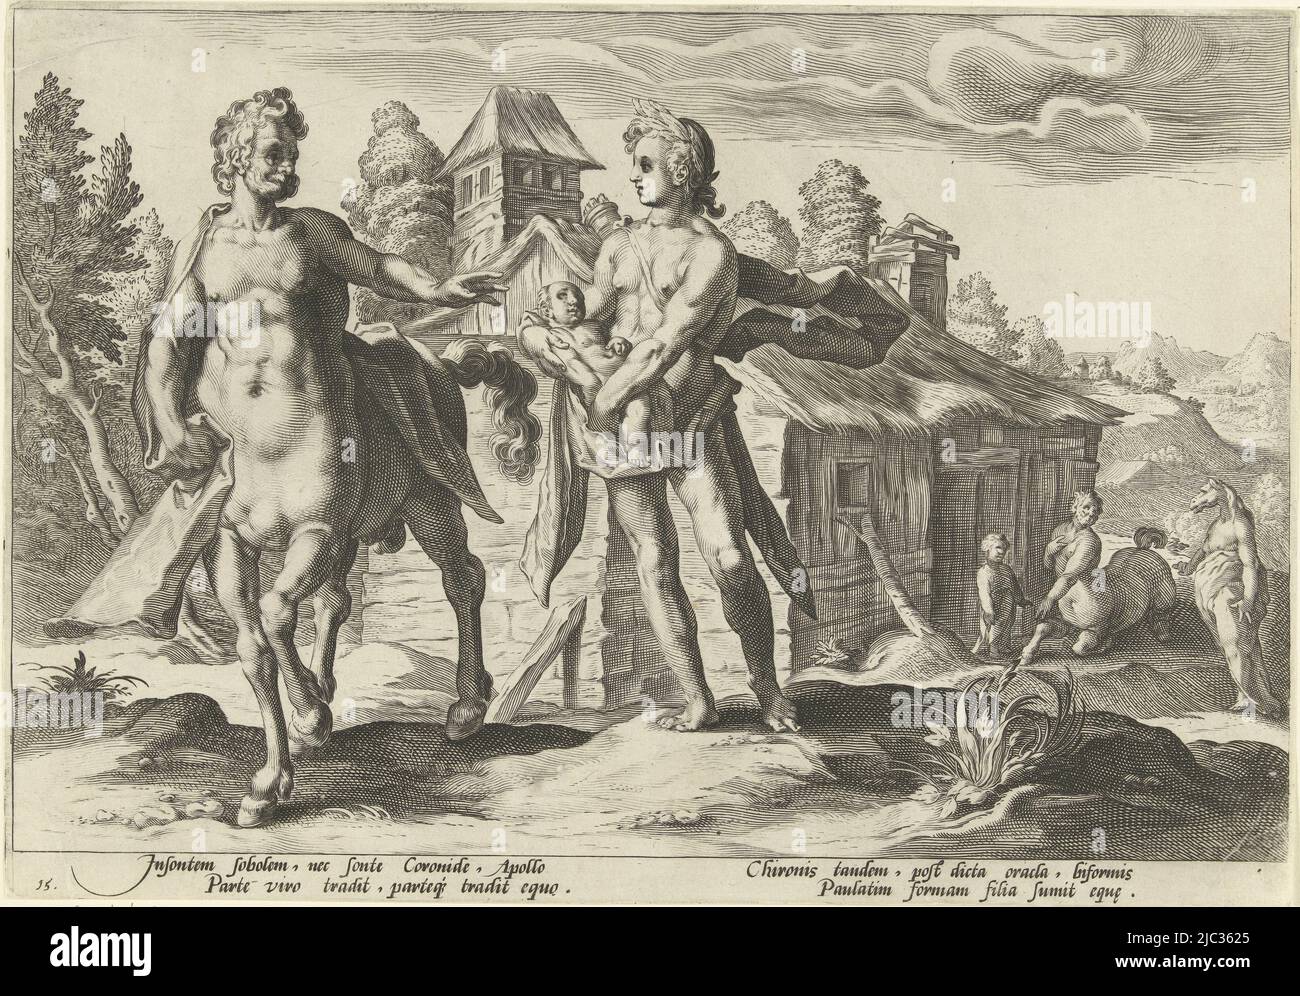 Apollo gives his child Asclepius, which he cut from Coronis' belly after shooting her dead, to the centaur Chiron. In the background, Chiron's daughter is shown turning into a horse, having predicted the future of Asclepius and her father. Below the depiction two times two lines of Latin text. This print is part of a series of 52 prints depicting stories from Ovid's Metamorphoses. This series is divided into three numbered series: two of 20 prints and one of 12 prints. This print belongs to the second series., Apollo entrusts Asclepius to Chiron Ovid's Metamorphoses (series title), print maker Stock Photo